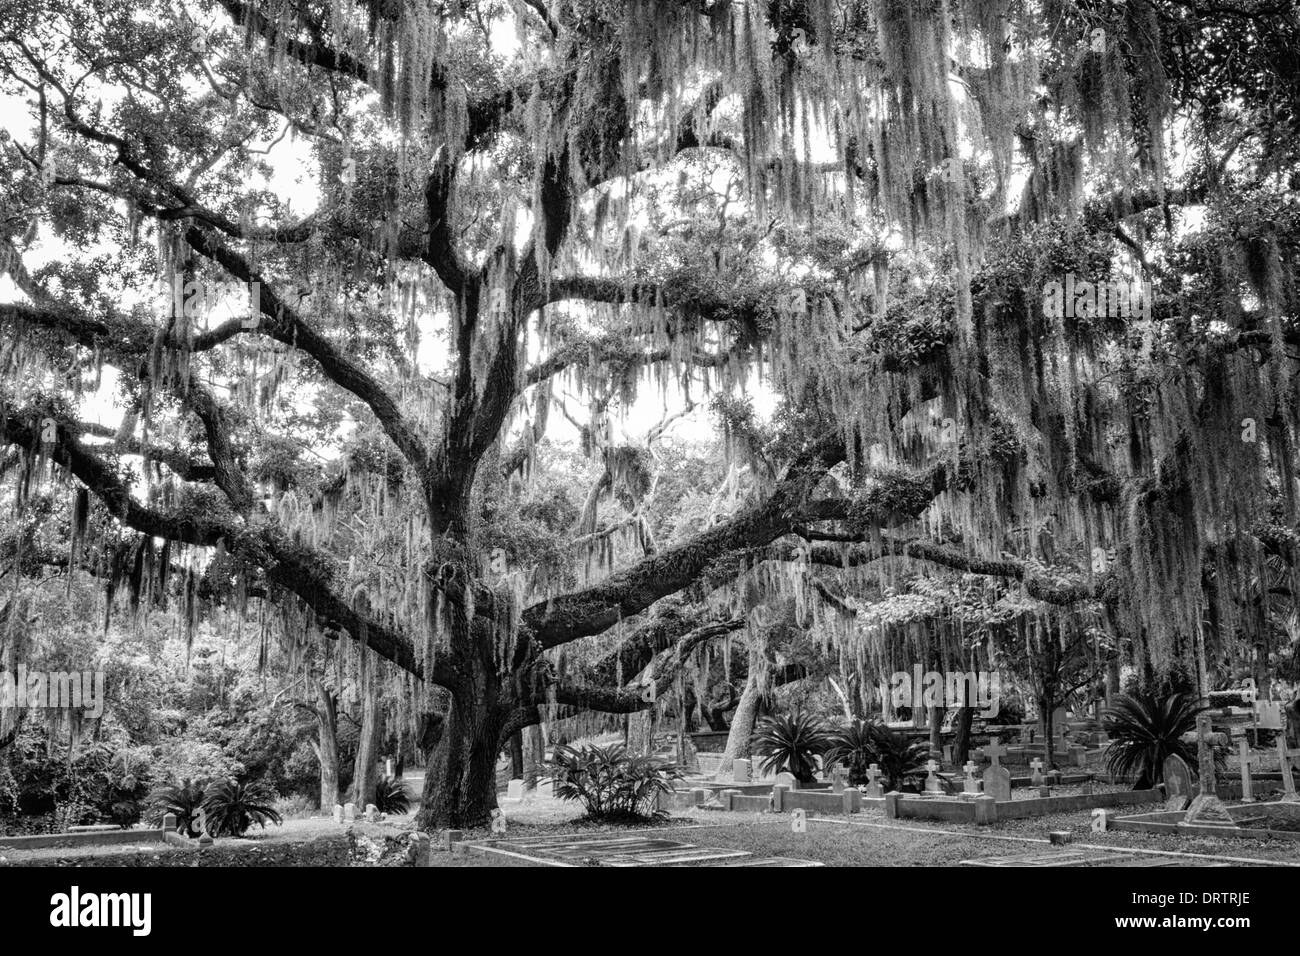 Live oak tree covered in Spanish moss in Fernandina Beach's Bosque Bello Cemetery. Converted to black and white. Stock Photo